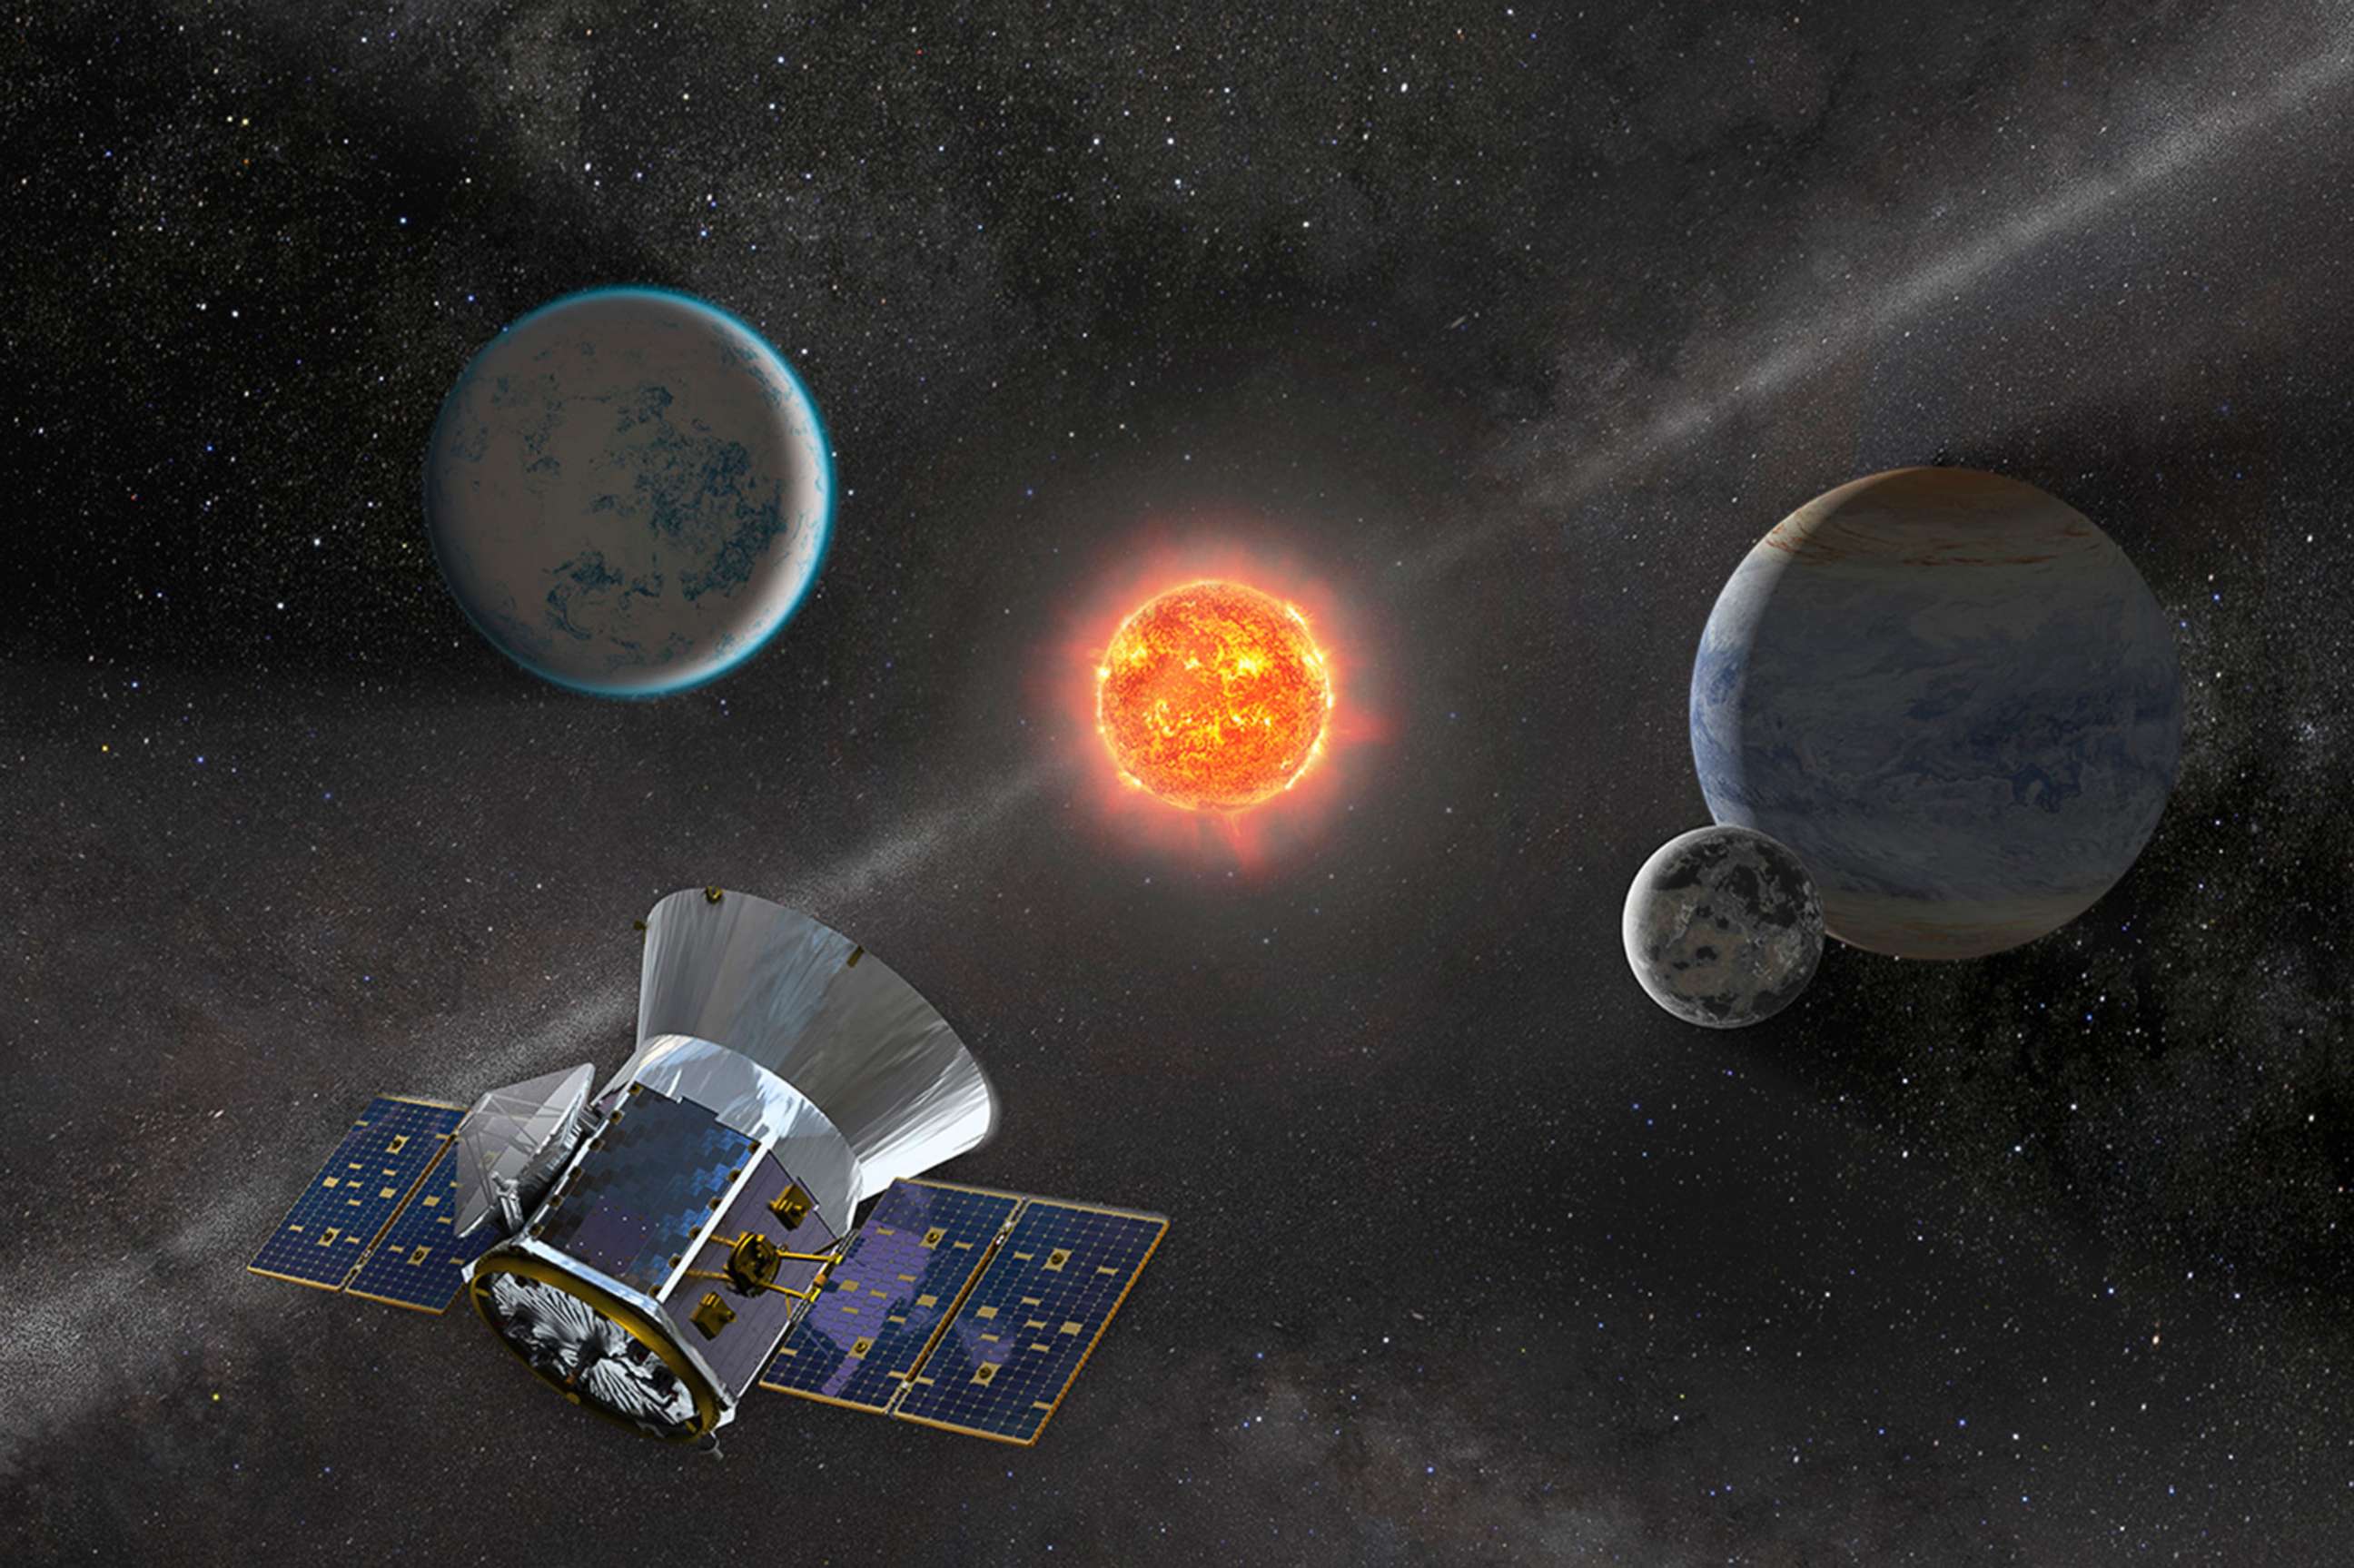 PHOTO: An illustration shows NASA's Transiting Exoplanet Survey Satellite observing an M dwarf star with orbiting planets.